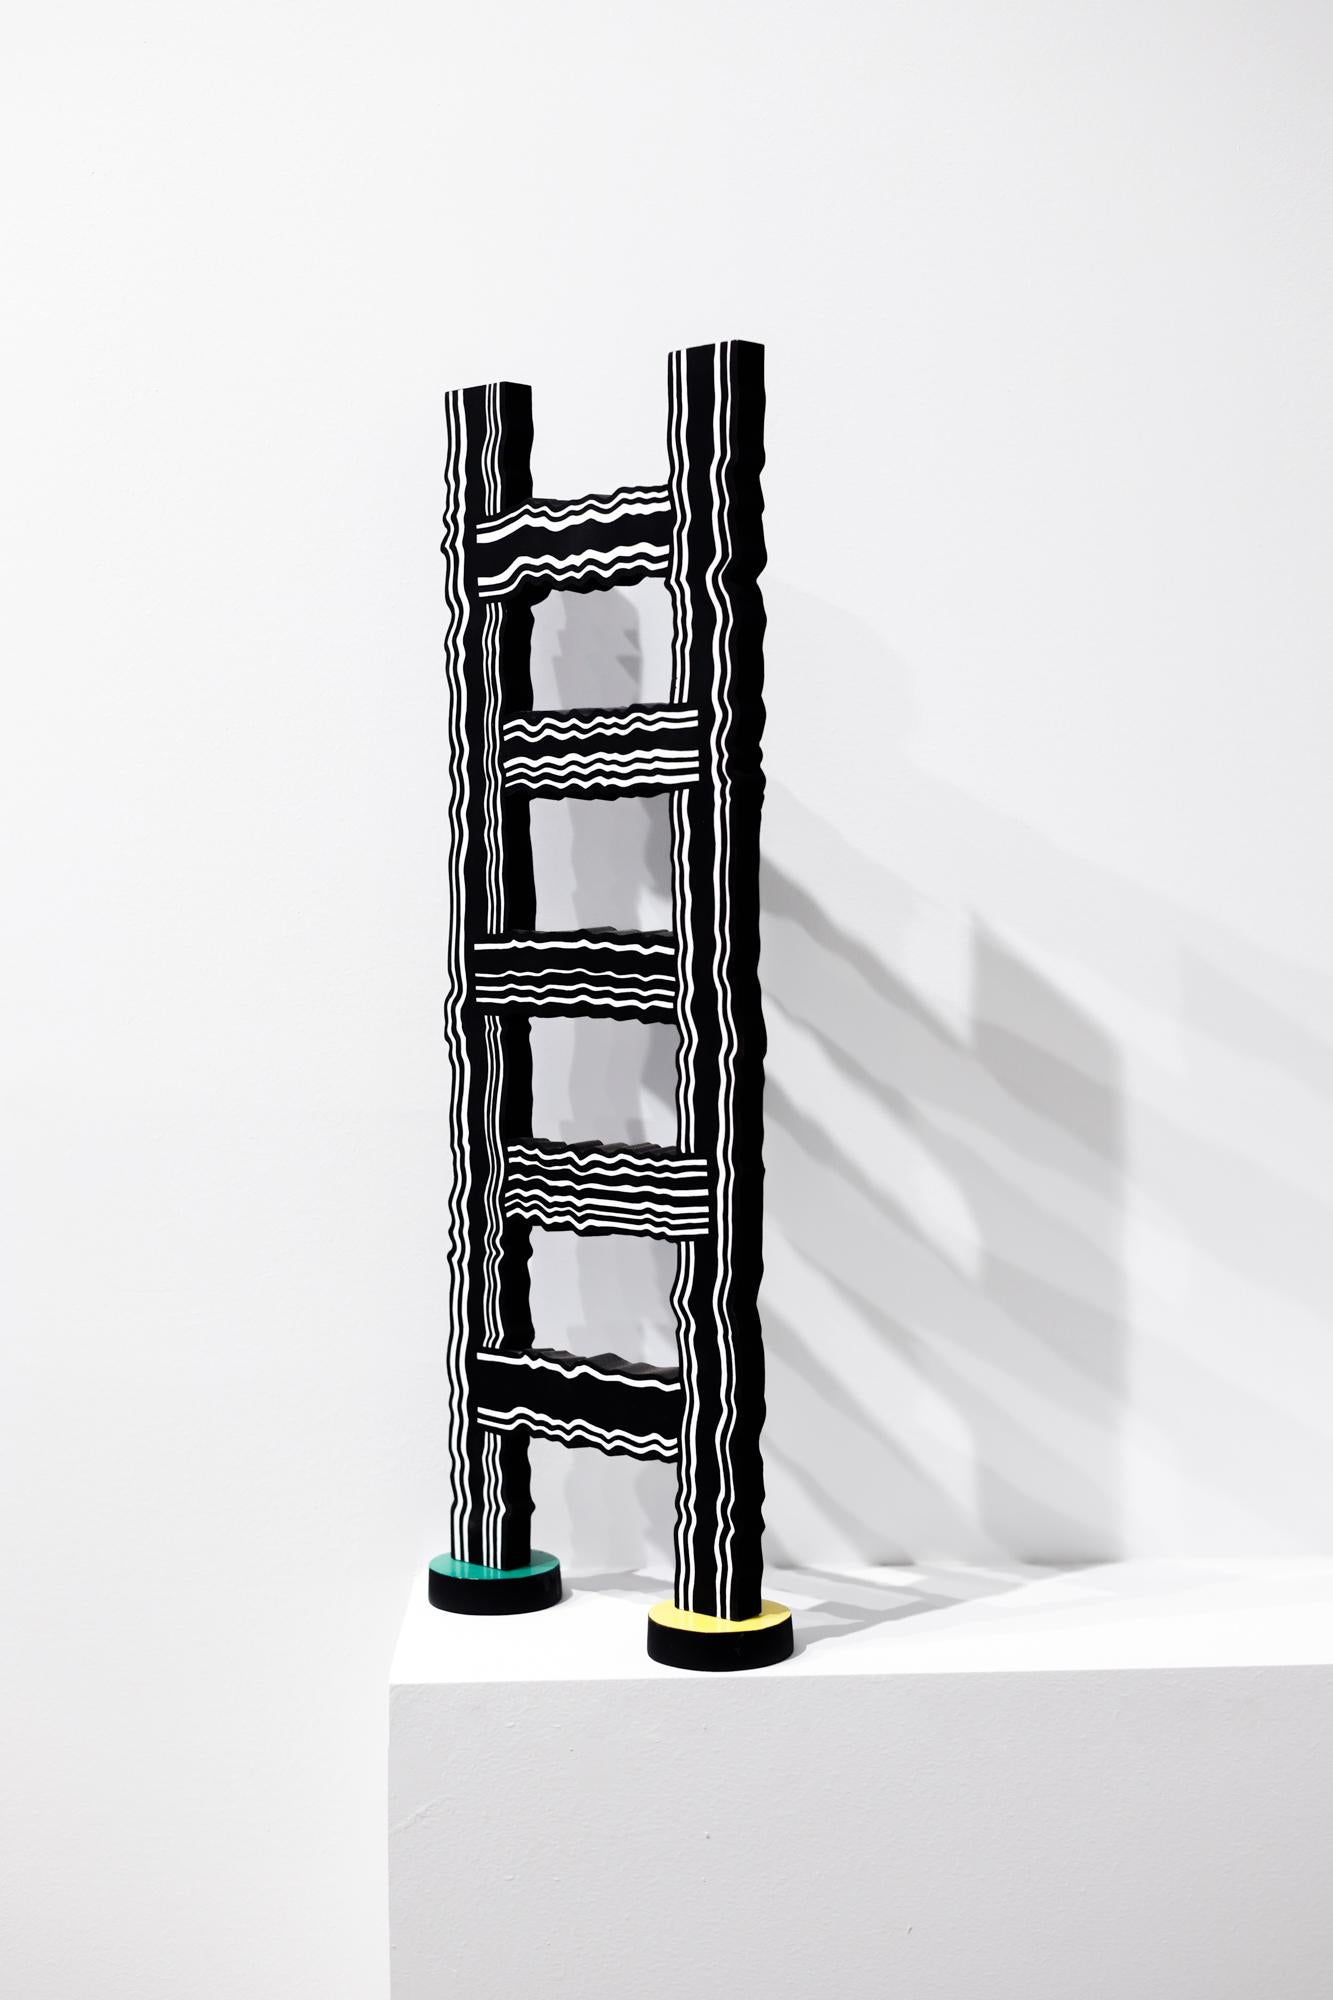 The Ladder - Sculpture by Jason Andrew Turner